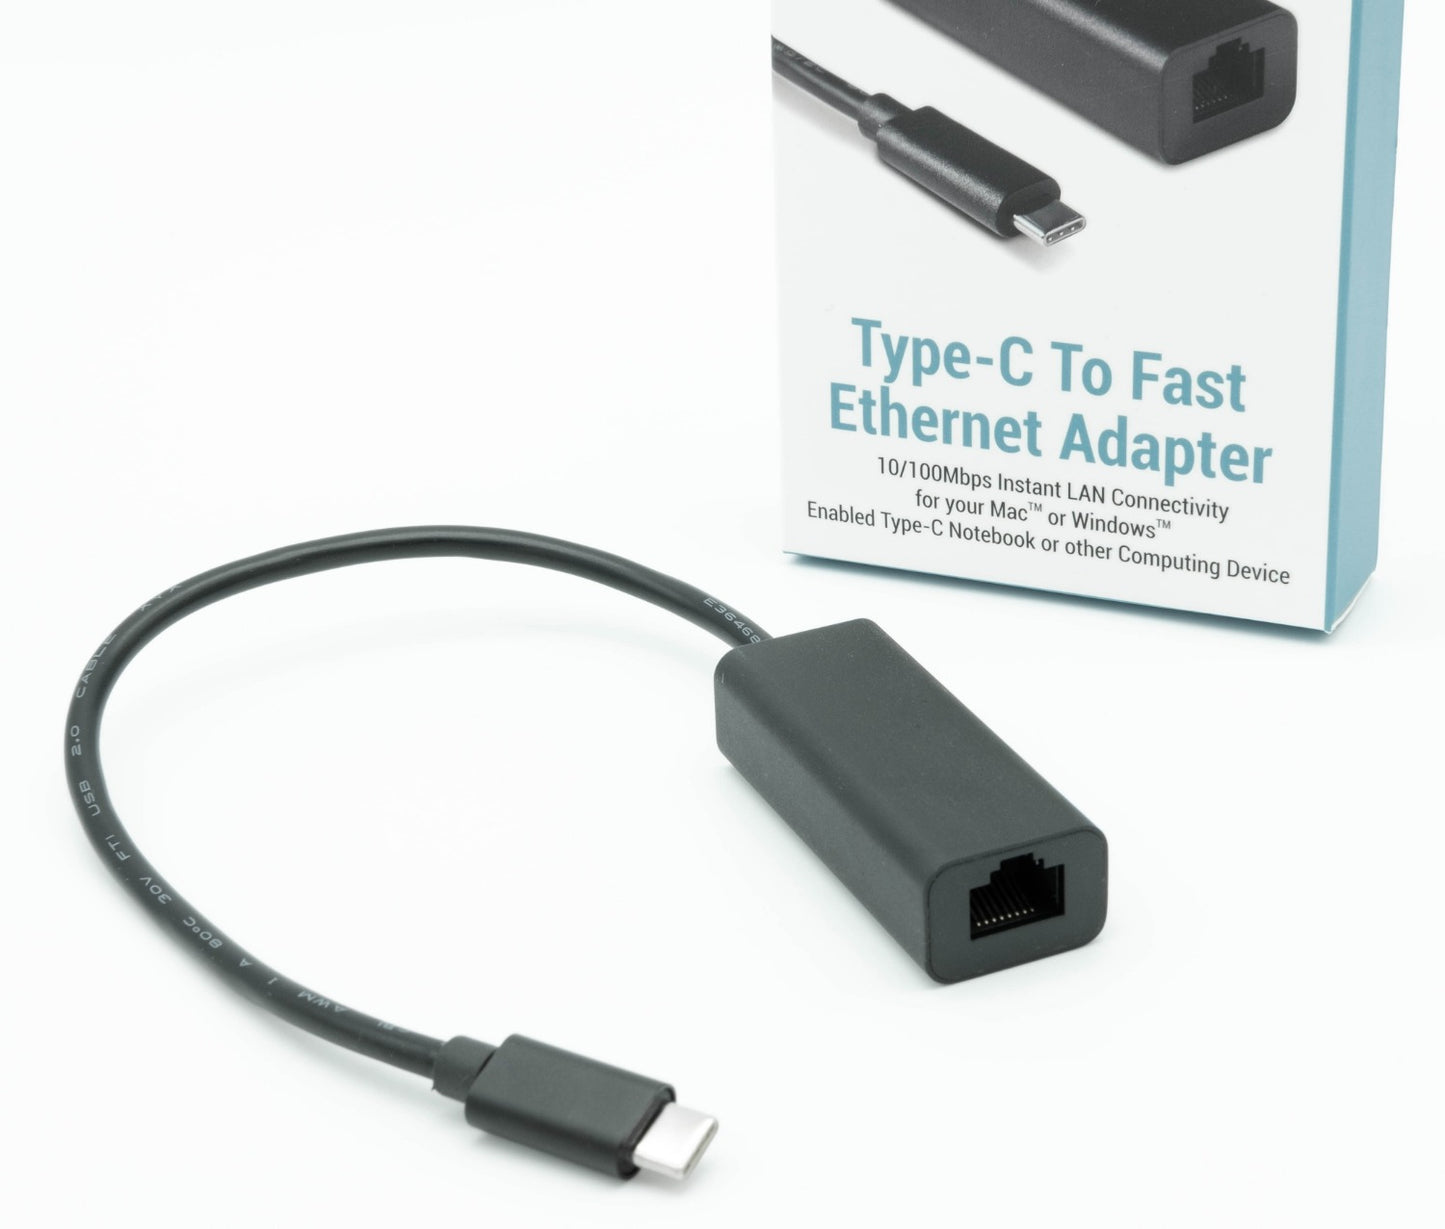 Fast Ethernet LAN adapter for Type-C devices